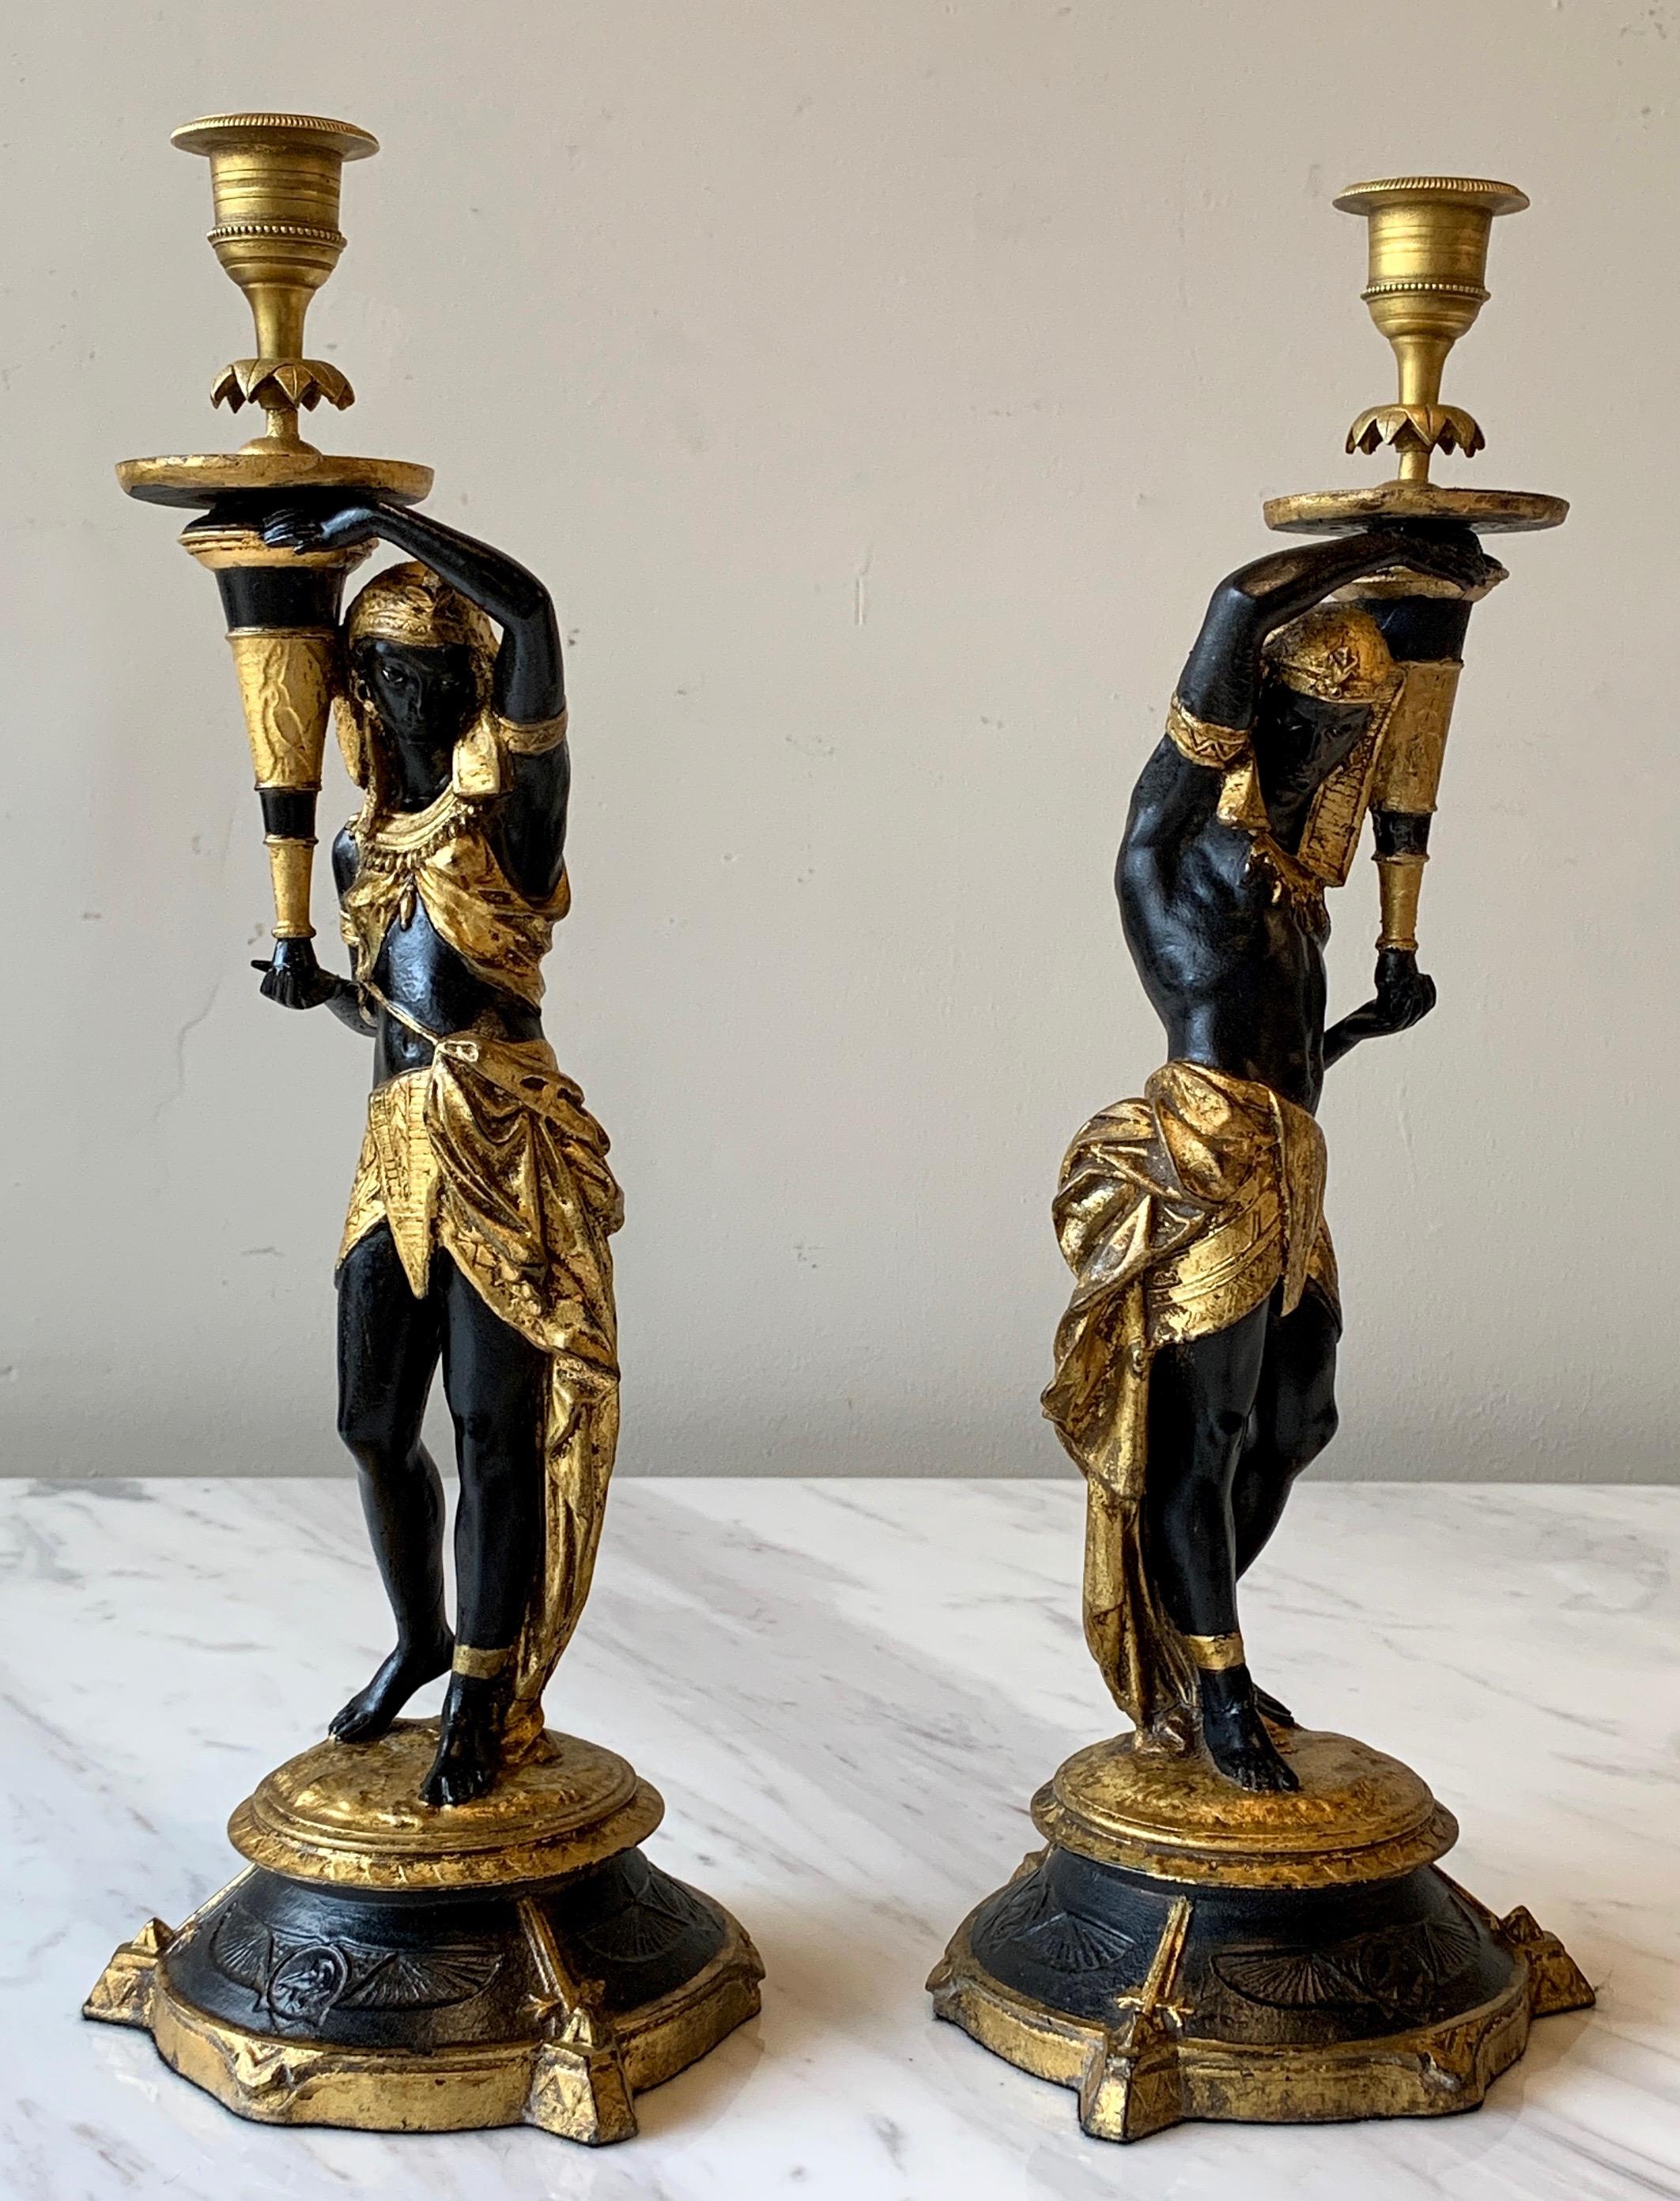 A fantastic mirrored pair of late 20th century. Egyptian revival ebonised and gilt decorated cast resin candlesticks depicting a male and female character holding torchieres.